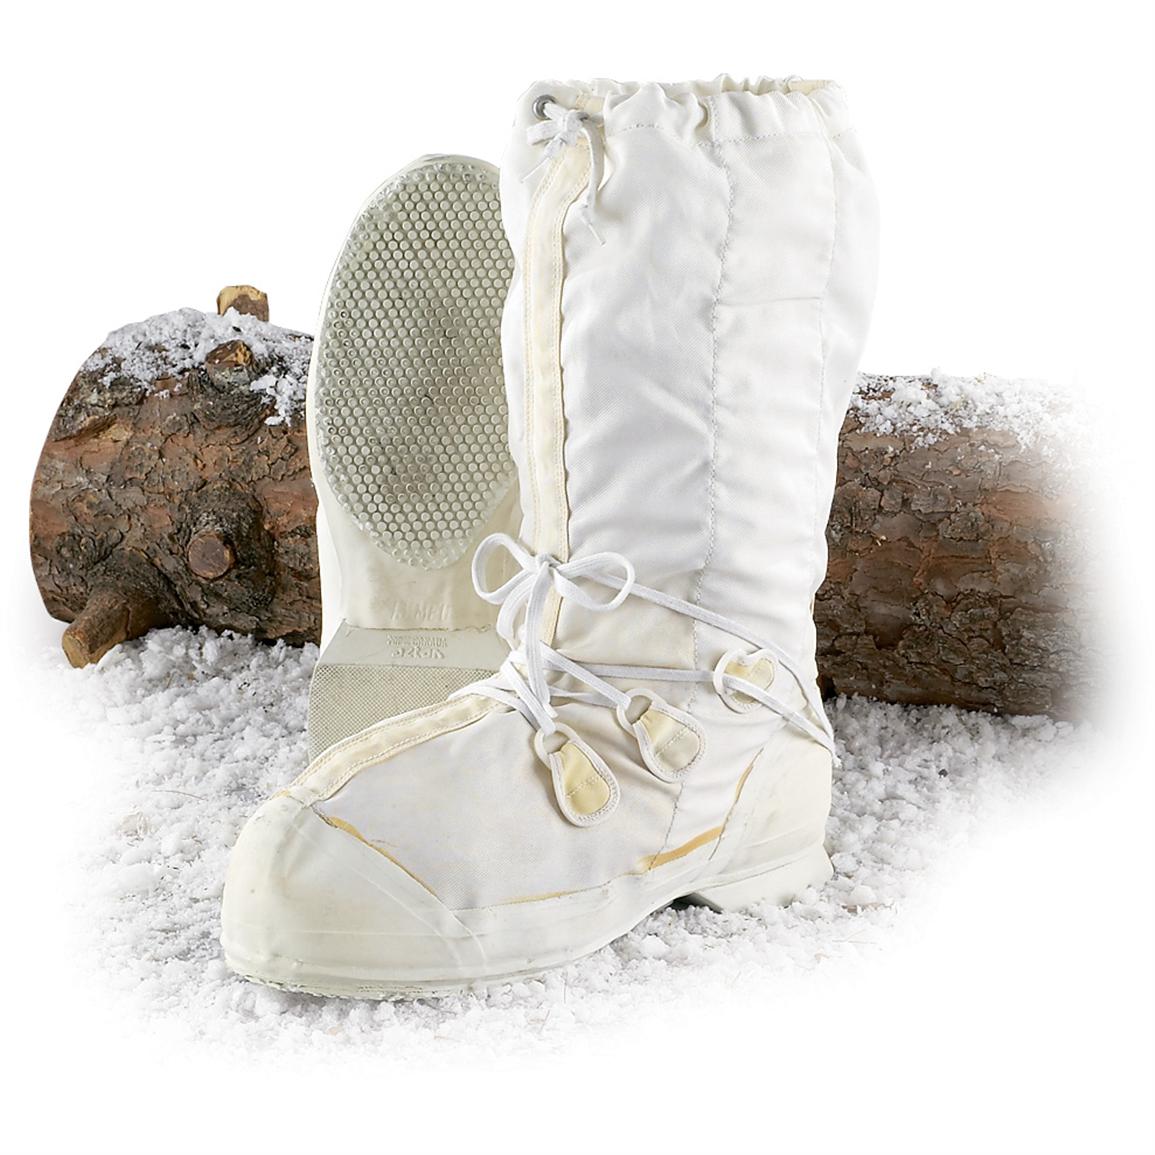 Canadian Army Mukluk Boots - Army Military